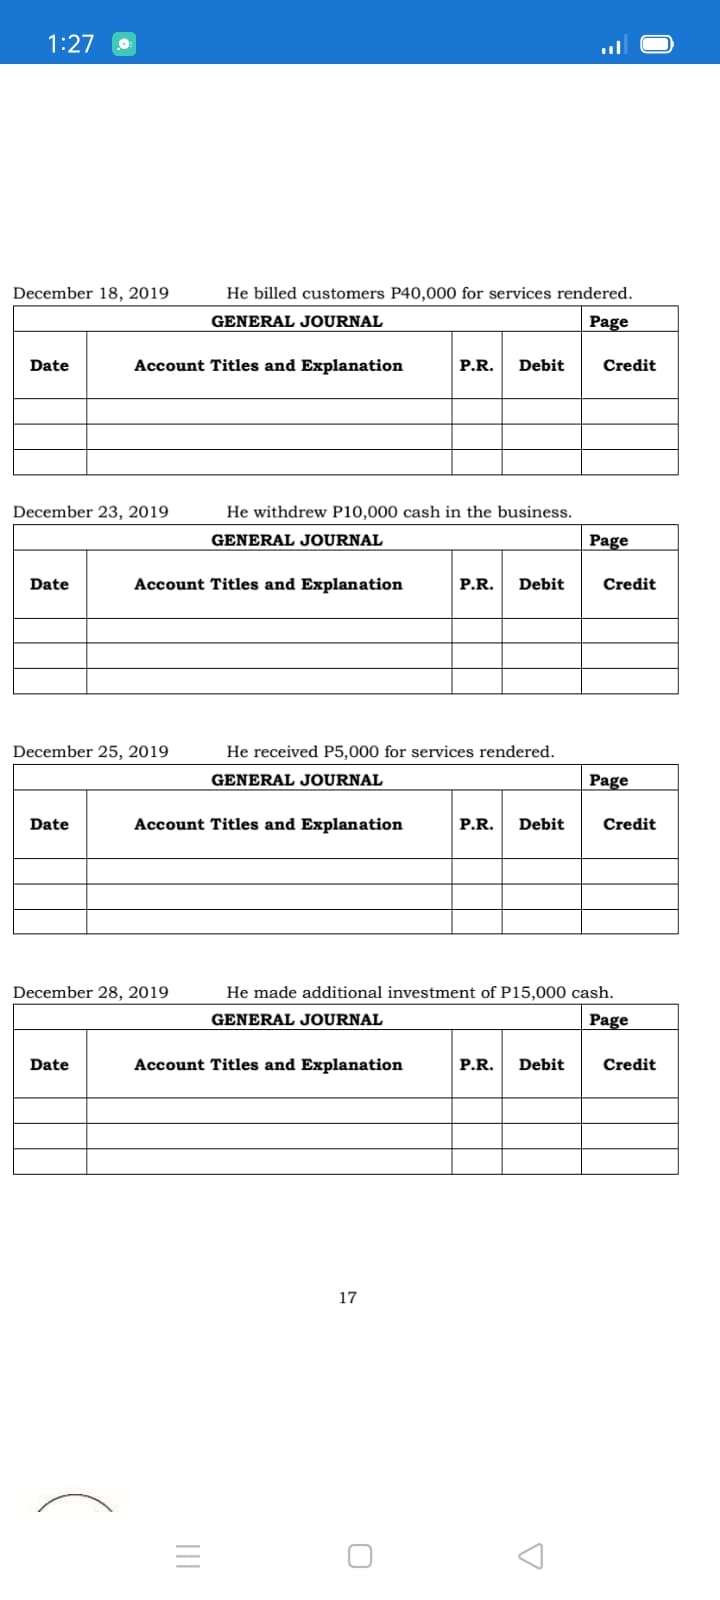 1:27
December 18, 2019
He billed customers P40,000 for services rendered.
GENERAL JOURNAL
Page
Date
Account Titles and Explanation
P.R.
Debit
Credit
December 23, 2019
He withdrew P10,000 cash in the business.
GENERAL JOURNAL
Page
Date
Account Titles and Explanation
P.R.
Debit
Credit
December 25, 2019
He received P5,000 for services rendered.
GENERAL JOURNAL
Page
Date
Account Titles and Explanation
P.R.
Debit
Credit
December 28, 2019
He made additional investment of P15,000 cash.
GENERAL JOURNAL
Page
Date
Account Titles and Explanation
P.R.
Debit
Credit
17
II
